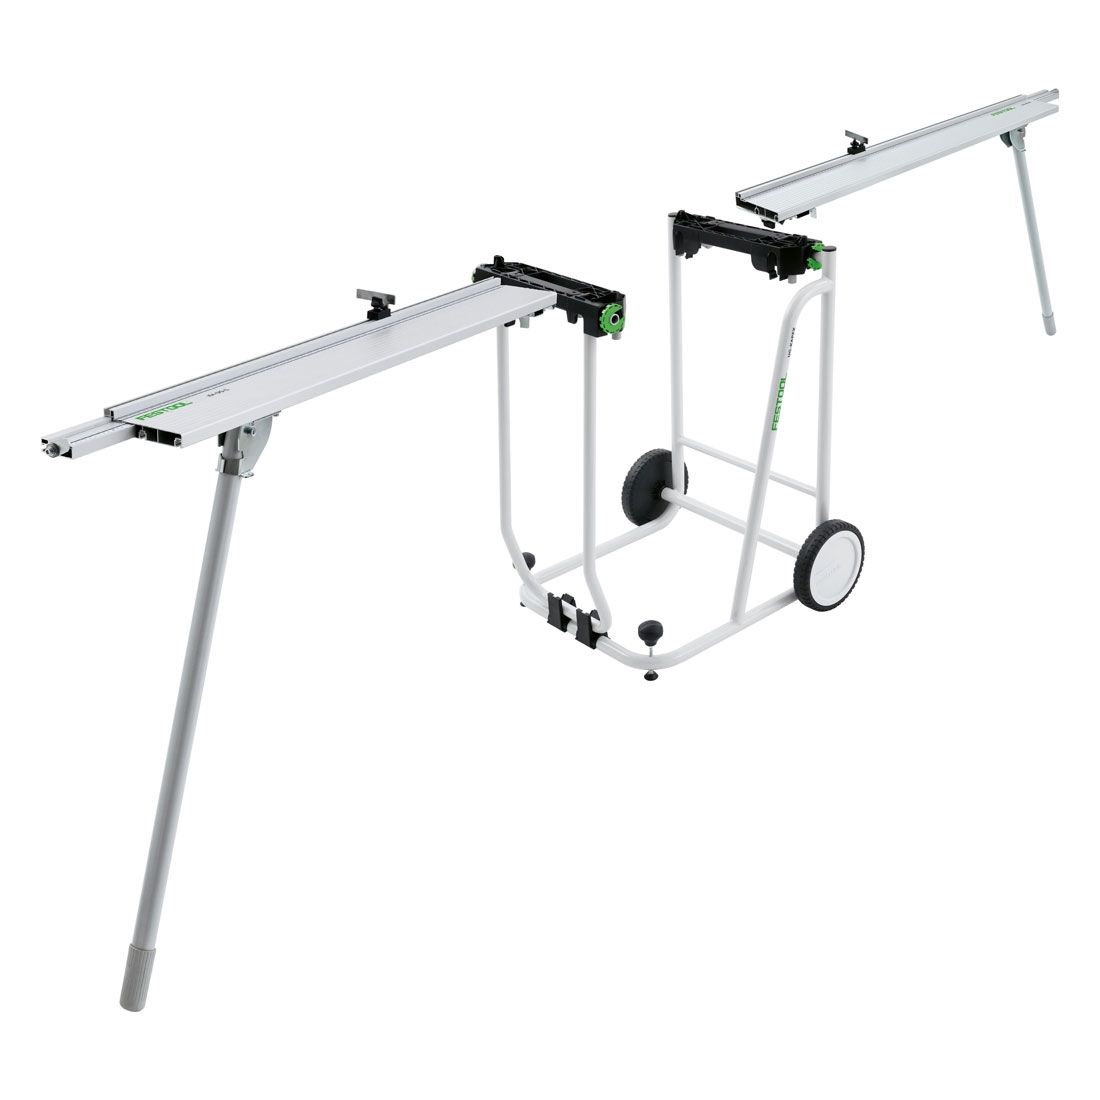 Festool Saw Stands & Work Tables